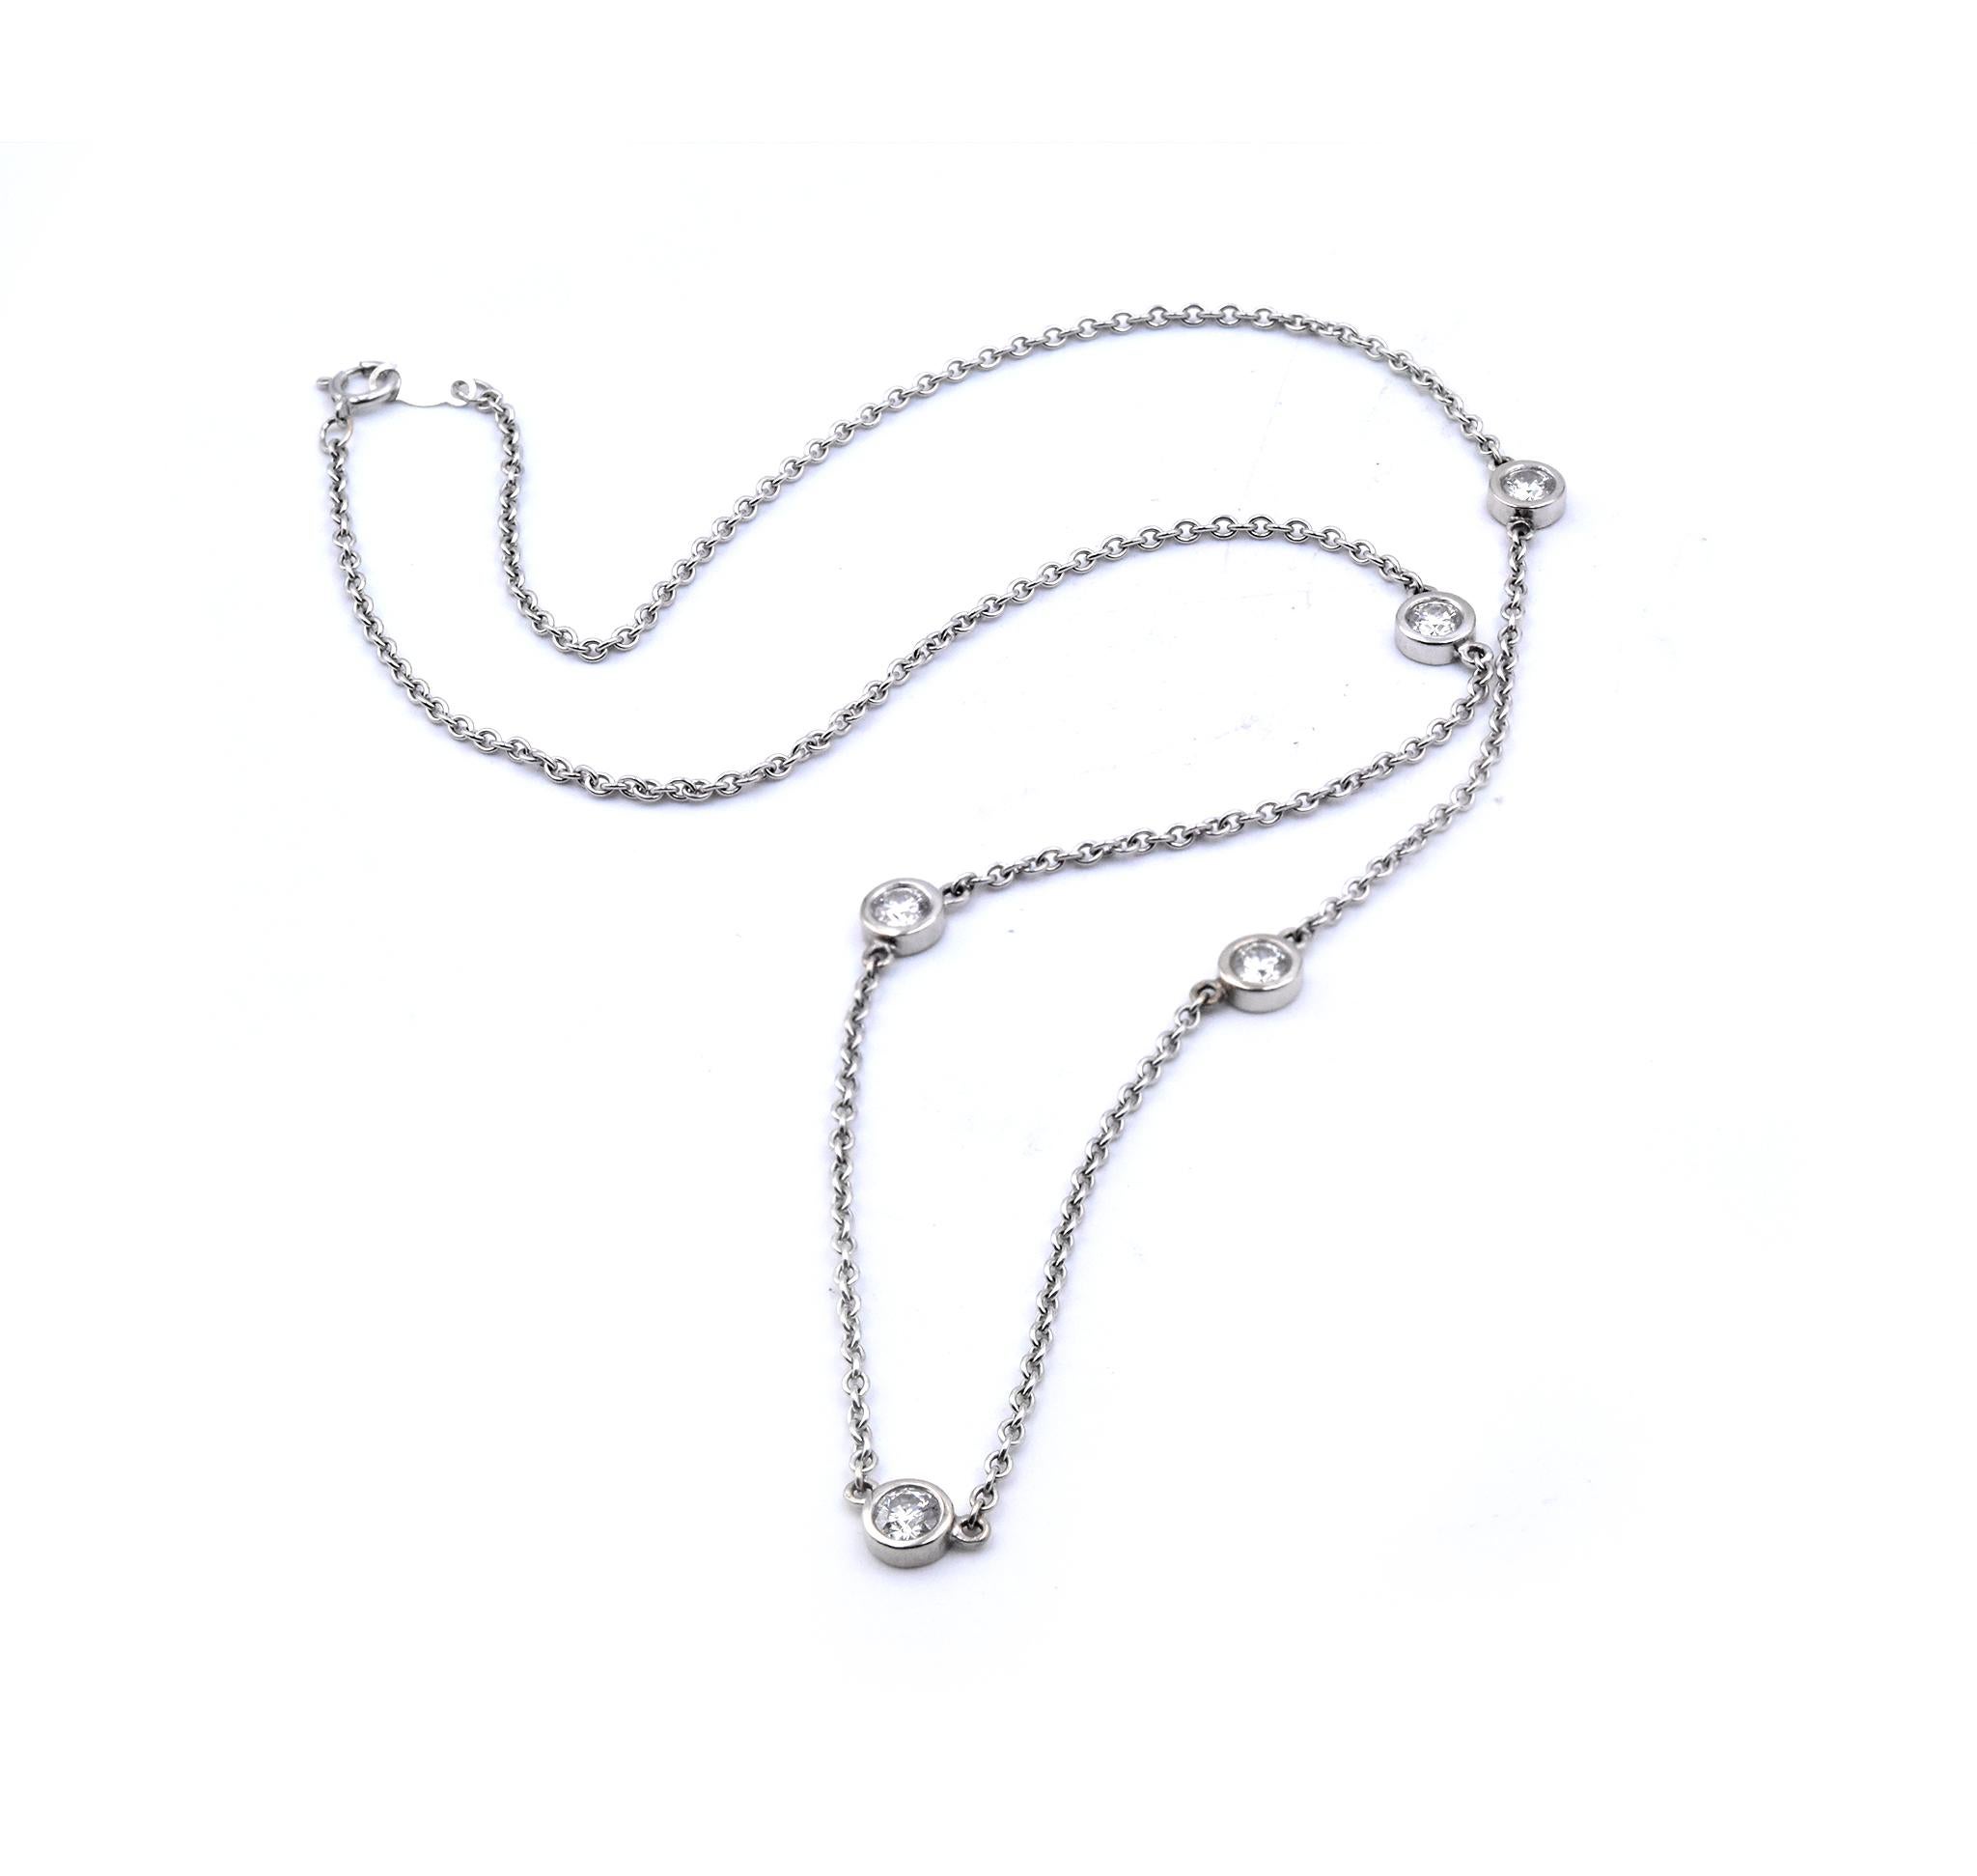 Designer: Watchlink
Material: 14k white gold
Diamonds: 5 round brilliant cuts = 0.75cttw
Color: G-H
Clarity: VS2
Dimensions: necklace measures 16-inches in length
Weight: 3.6 grams
